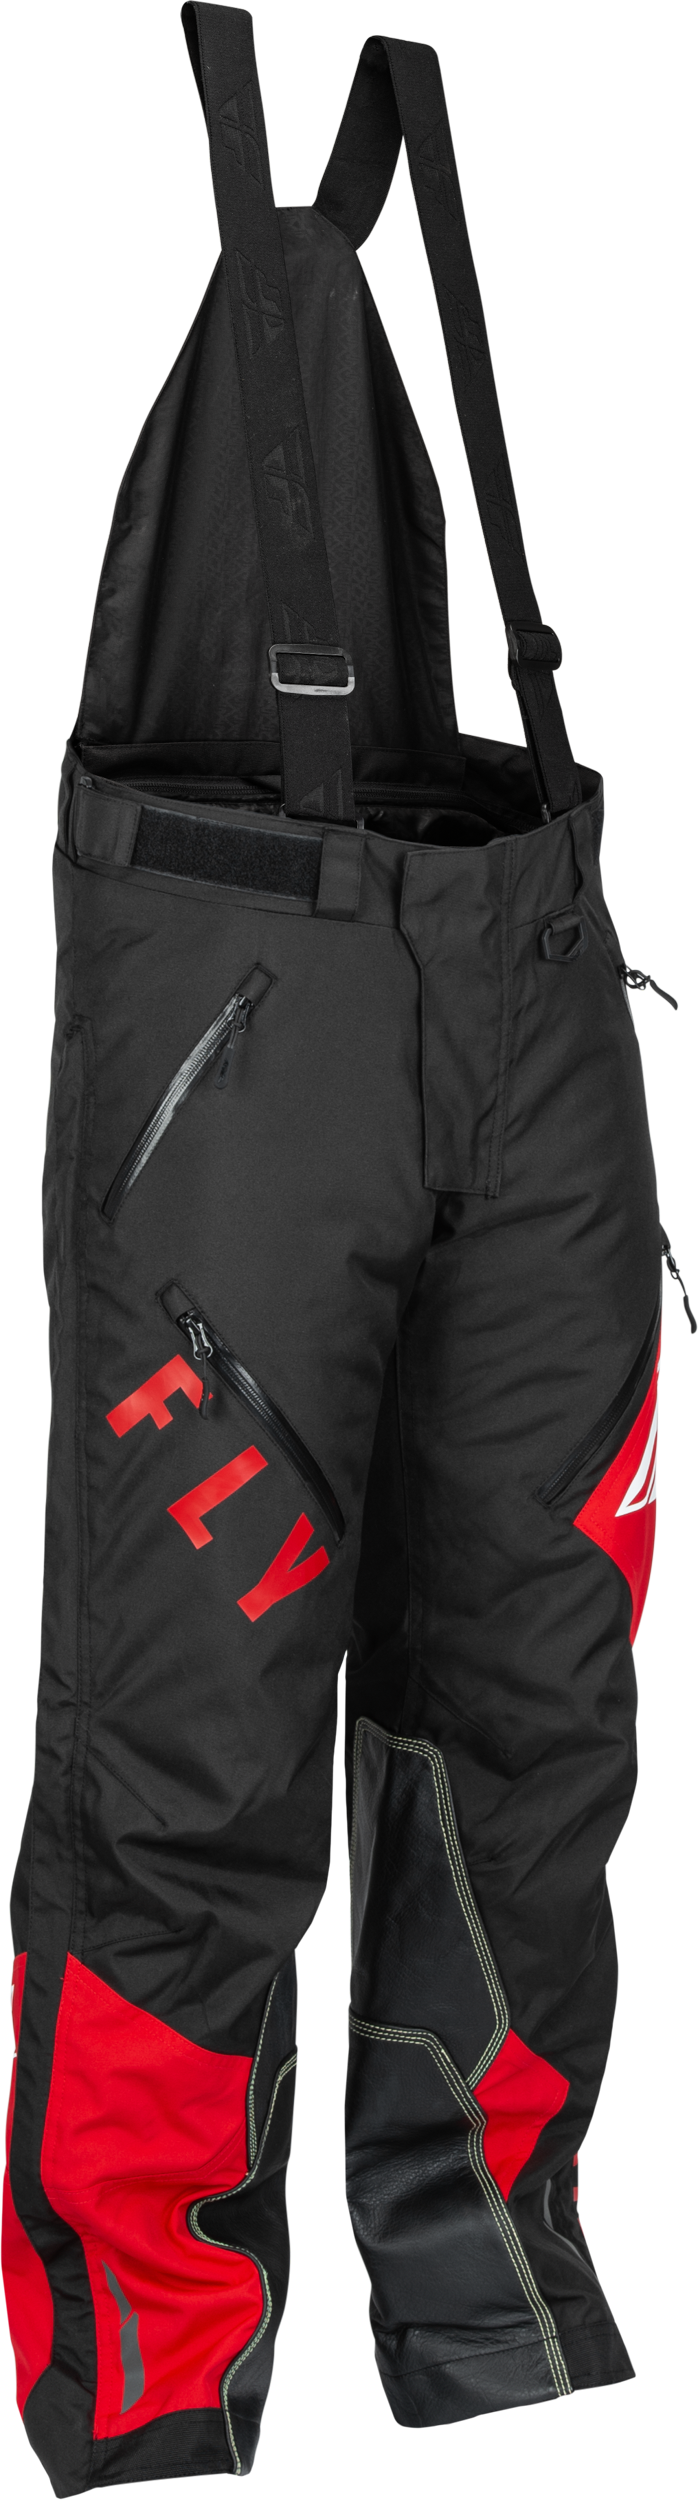 FLY RACING Snx Pro Sb Pant Black/Red Md 470-6101M